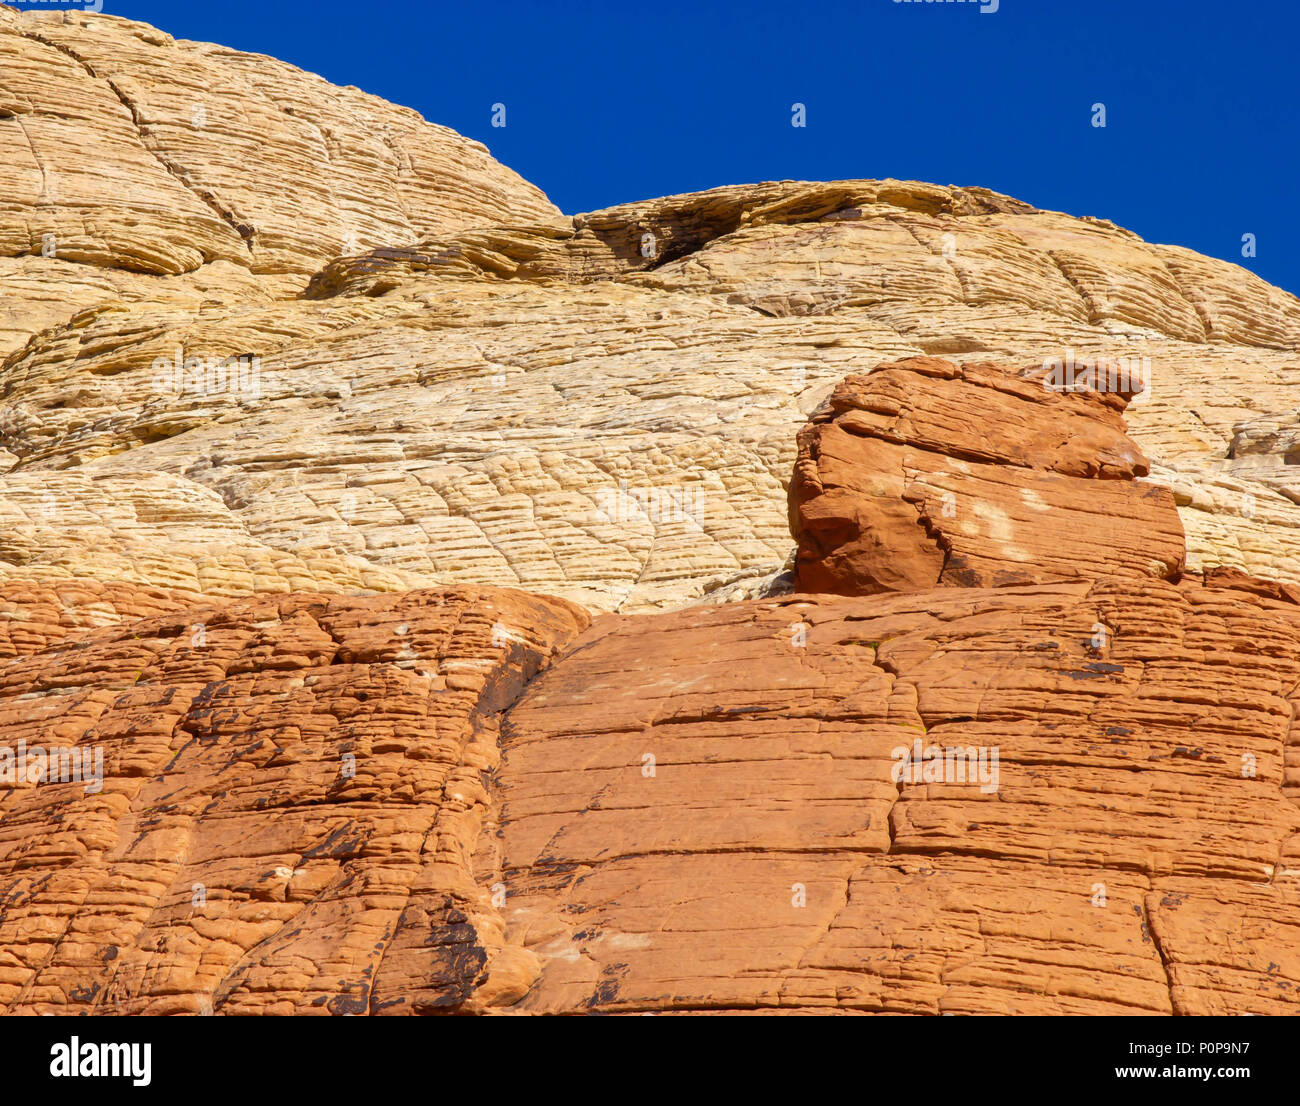 Formations at Red Rock Canyon, Las Vegas Nevada Stock Photo Alamy